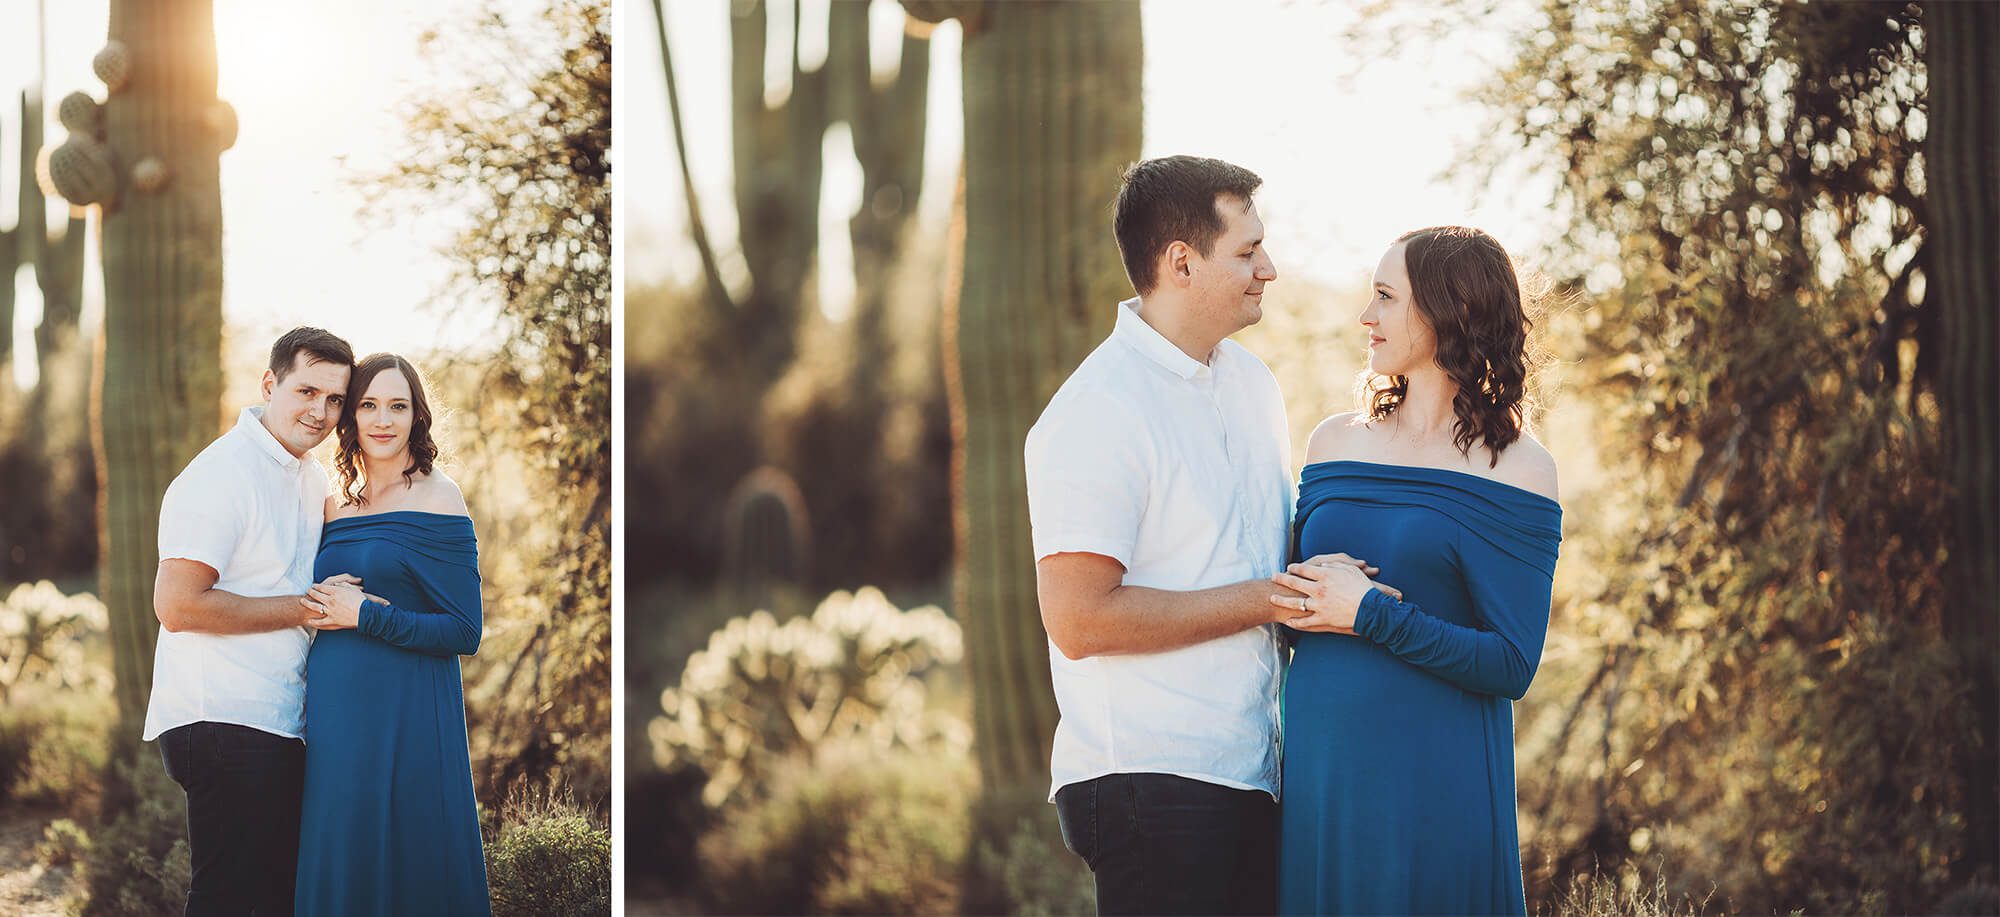 The setting sun at Sabino during Eric and Adrianne's maternity session